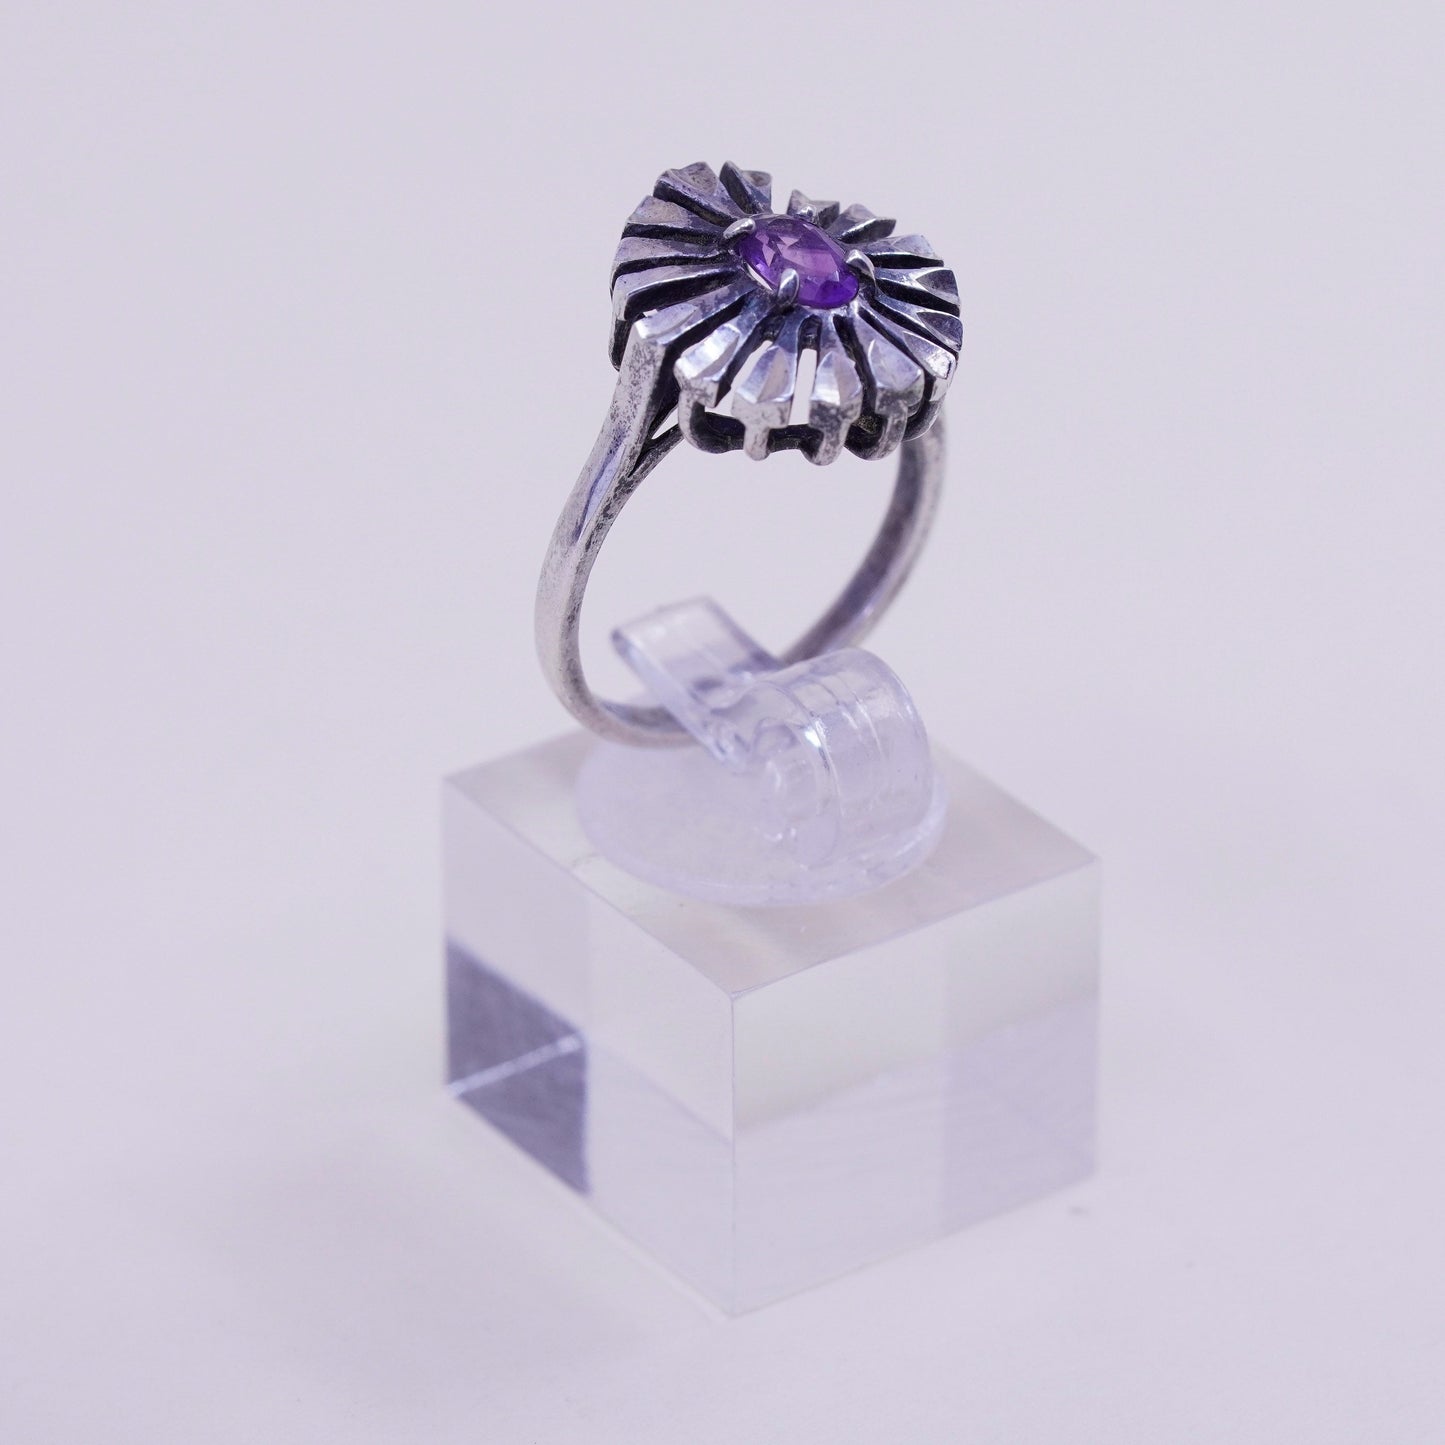 Size 7.25, vintage Kabana 925 silver handmade flower ring with amethyst